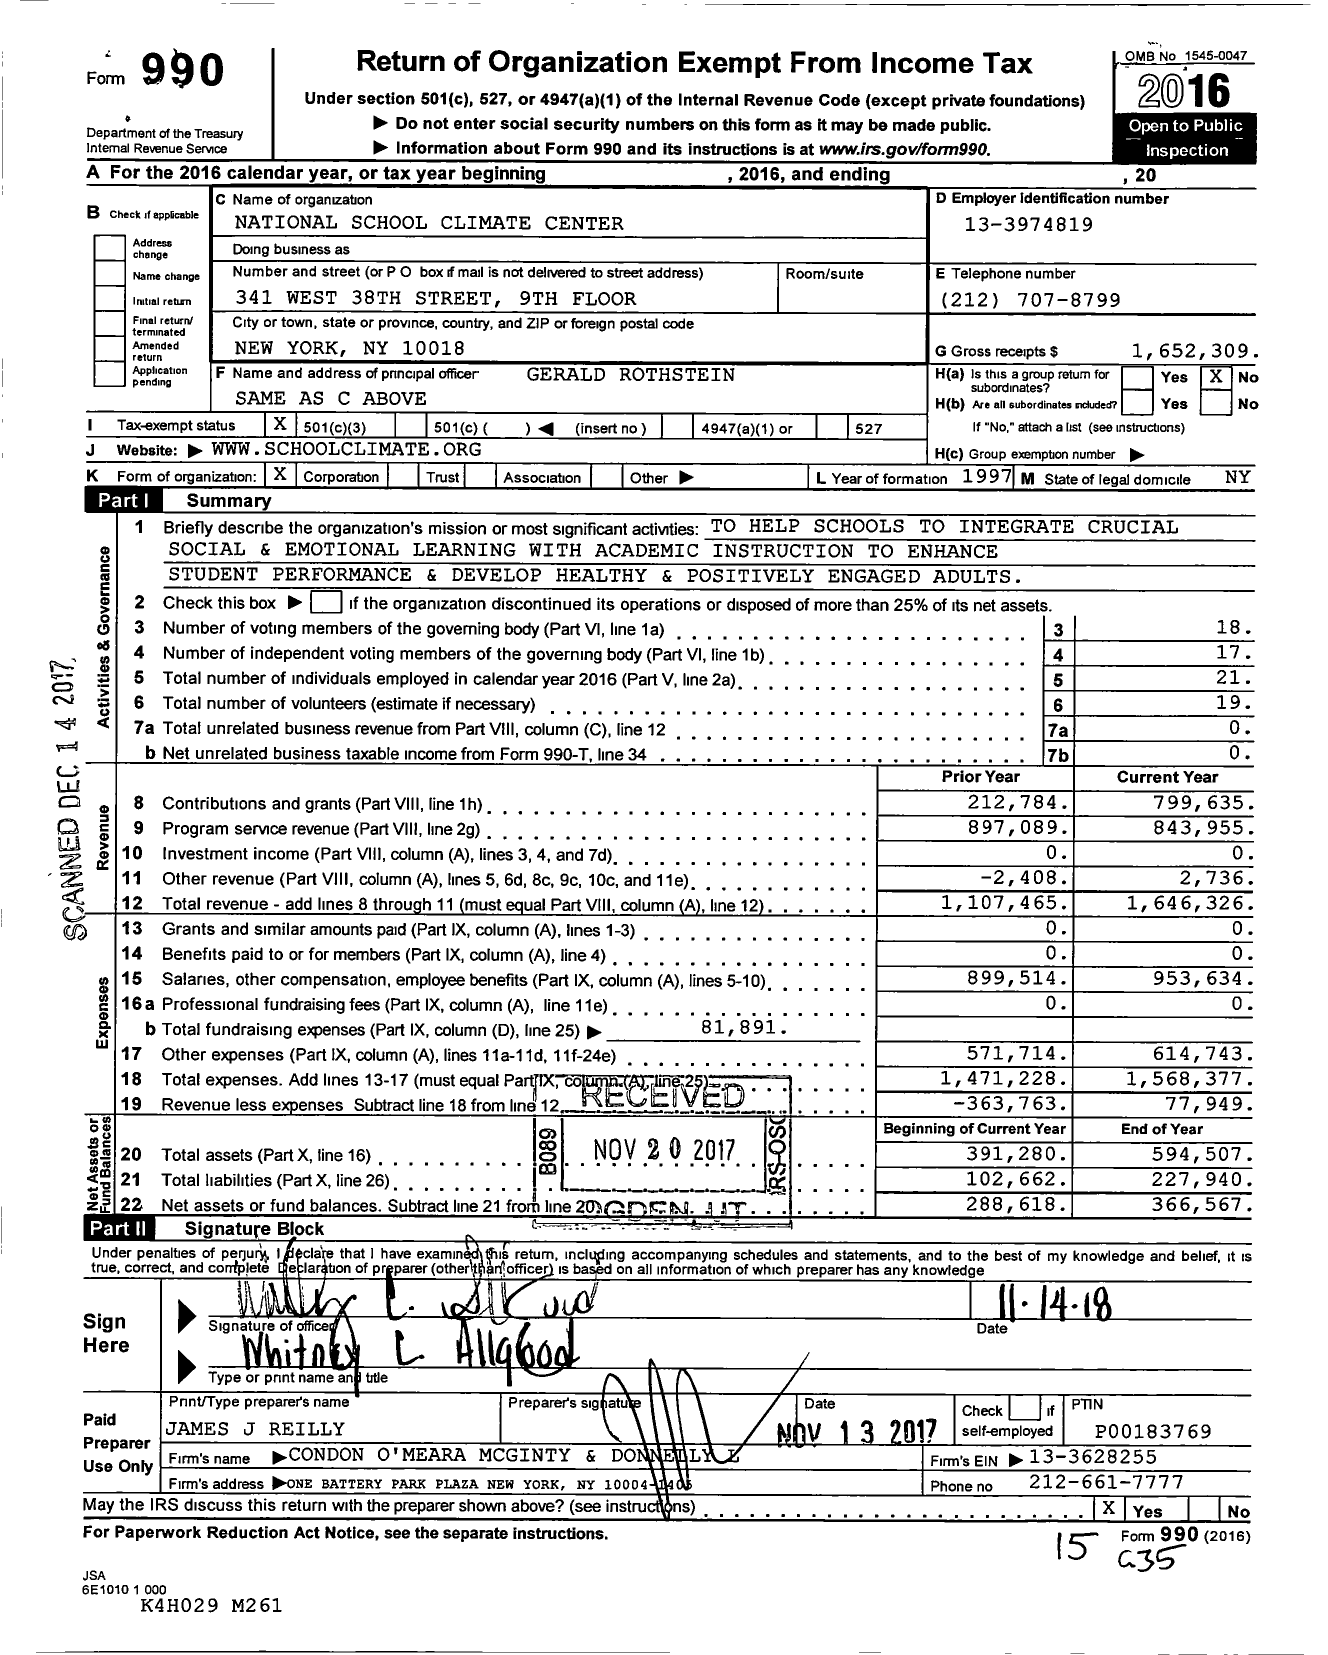 Image of first page of 2016 Form 990 for National School Climate Center